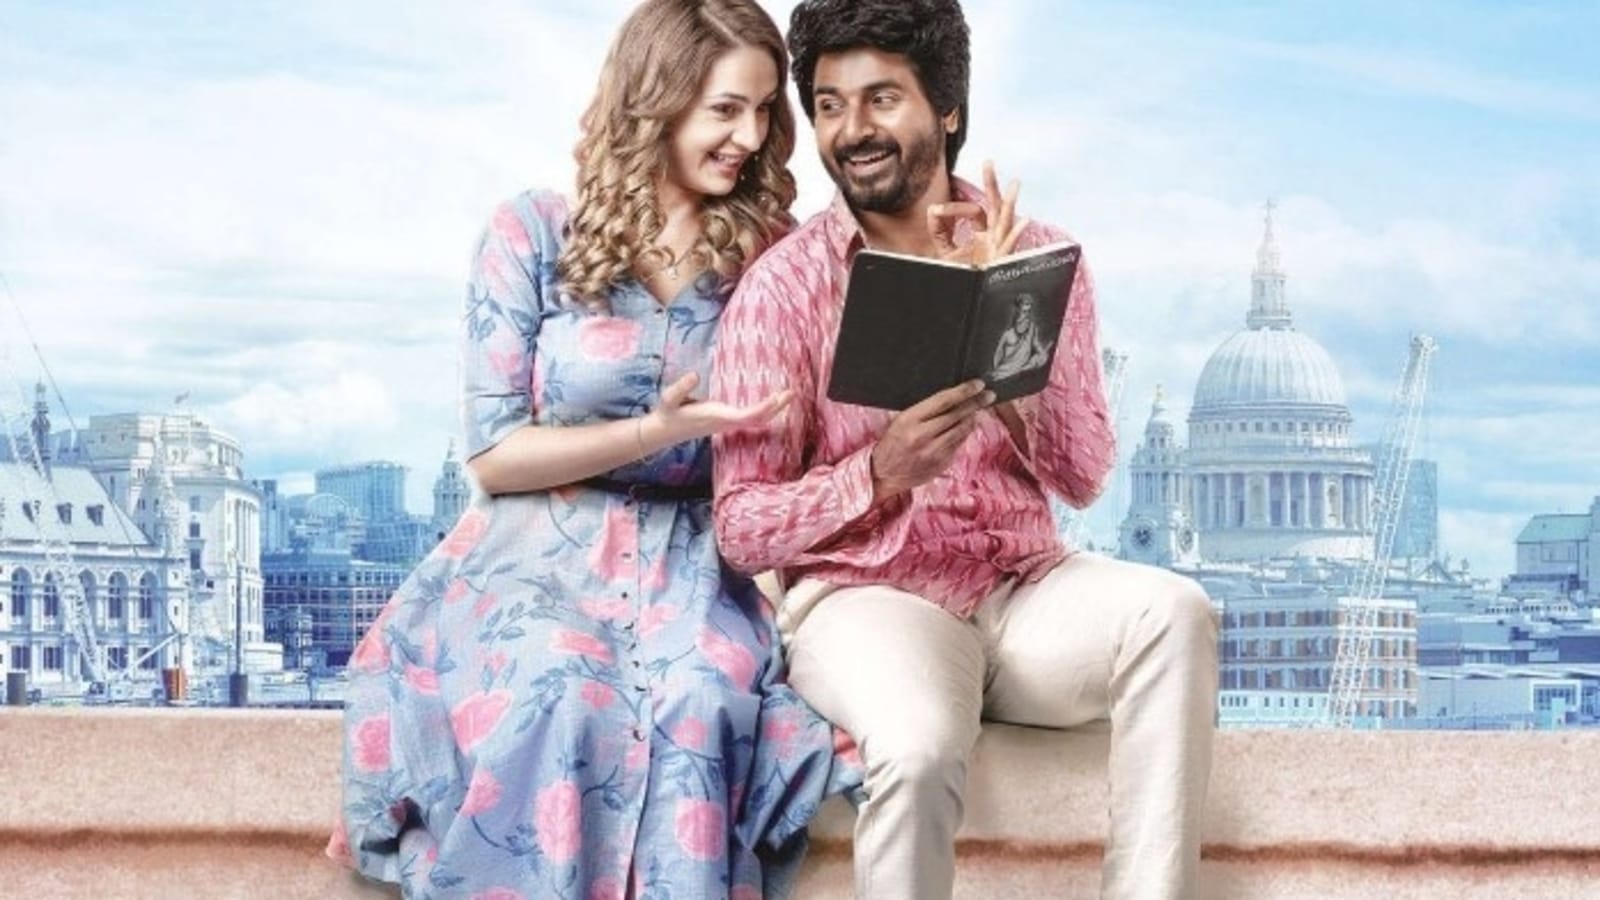 Prince movie review: Sivakarthikeyan's charm makes this silly ...